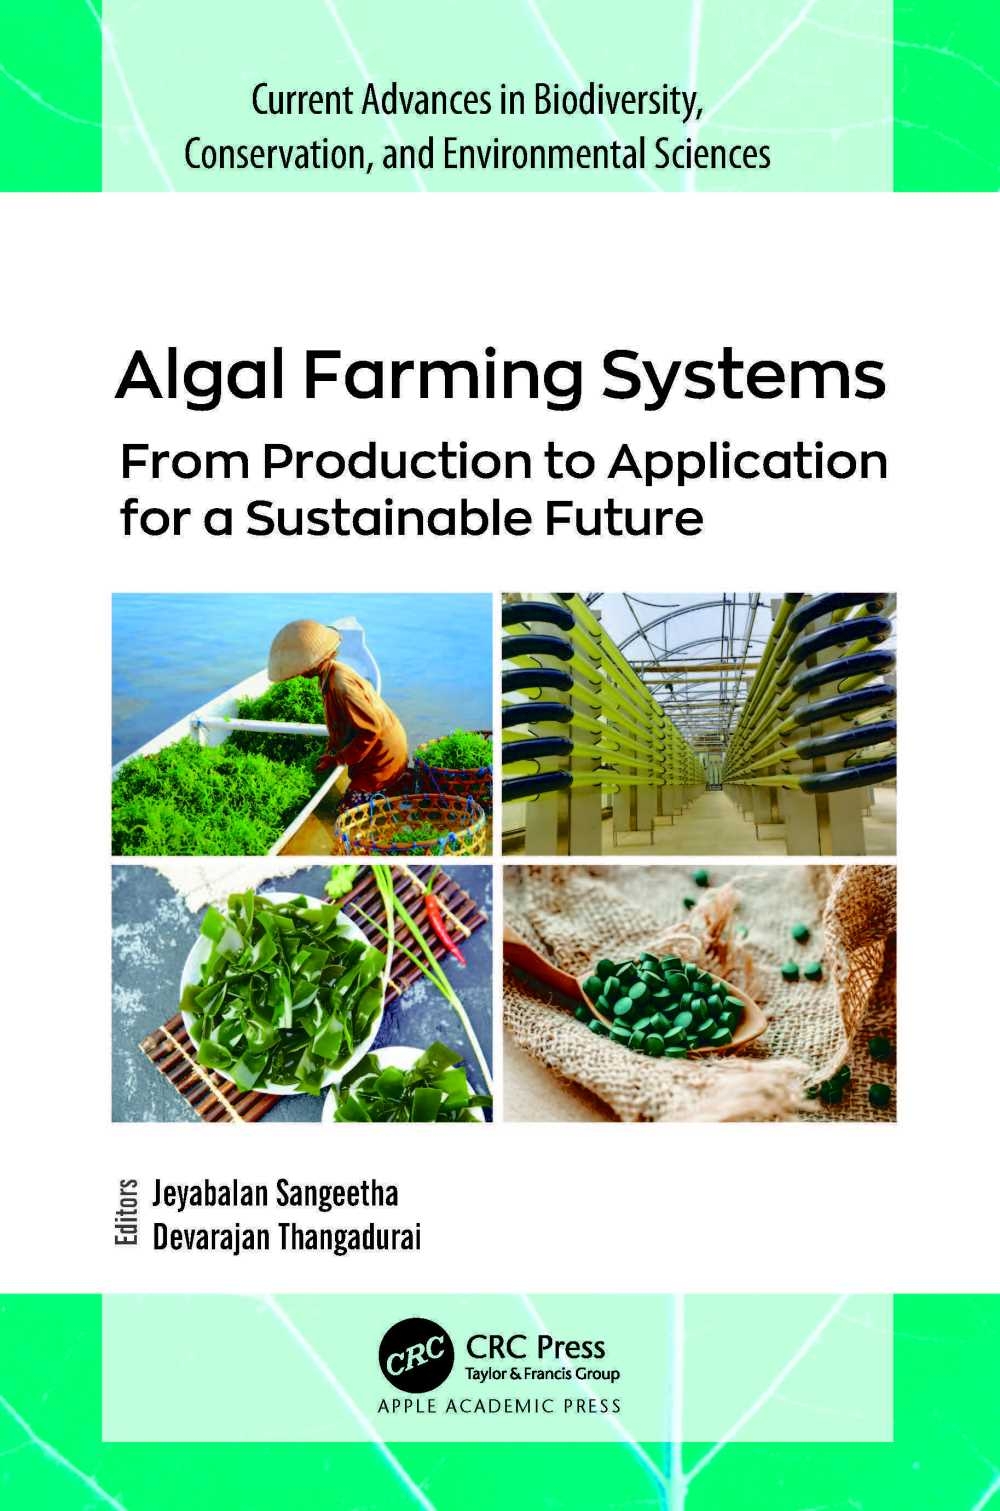 Algal Farming Systems: From Production to Application for a Sustainable Future